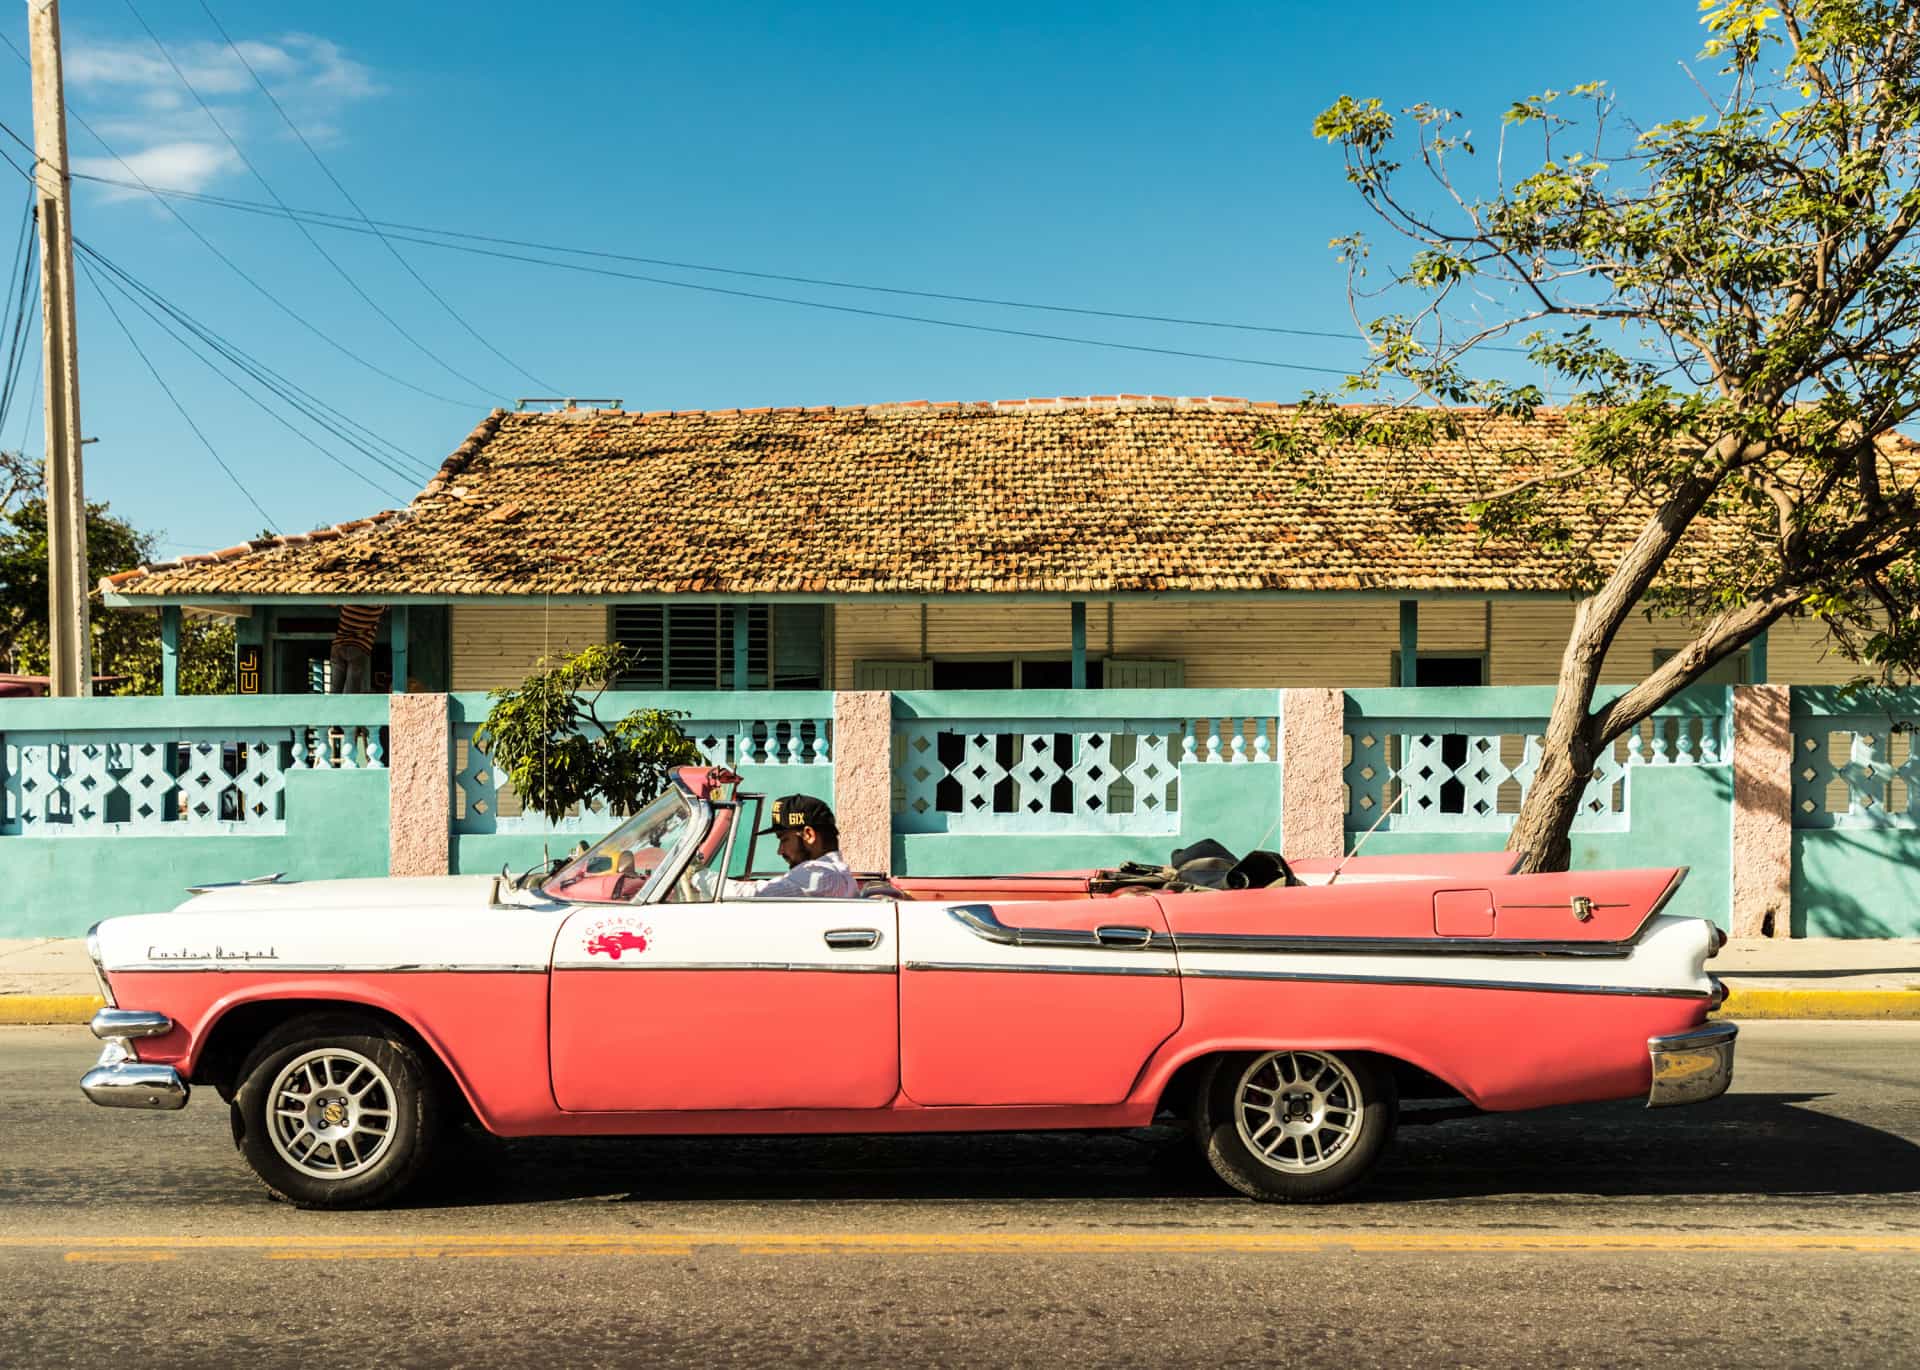 The striking colors are another detail that draws attention to Cuba's classic cars.